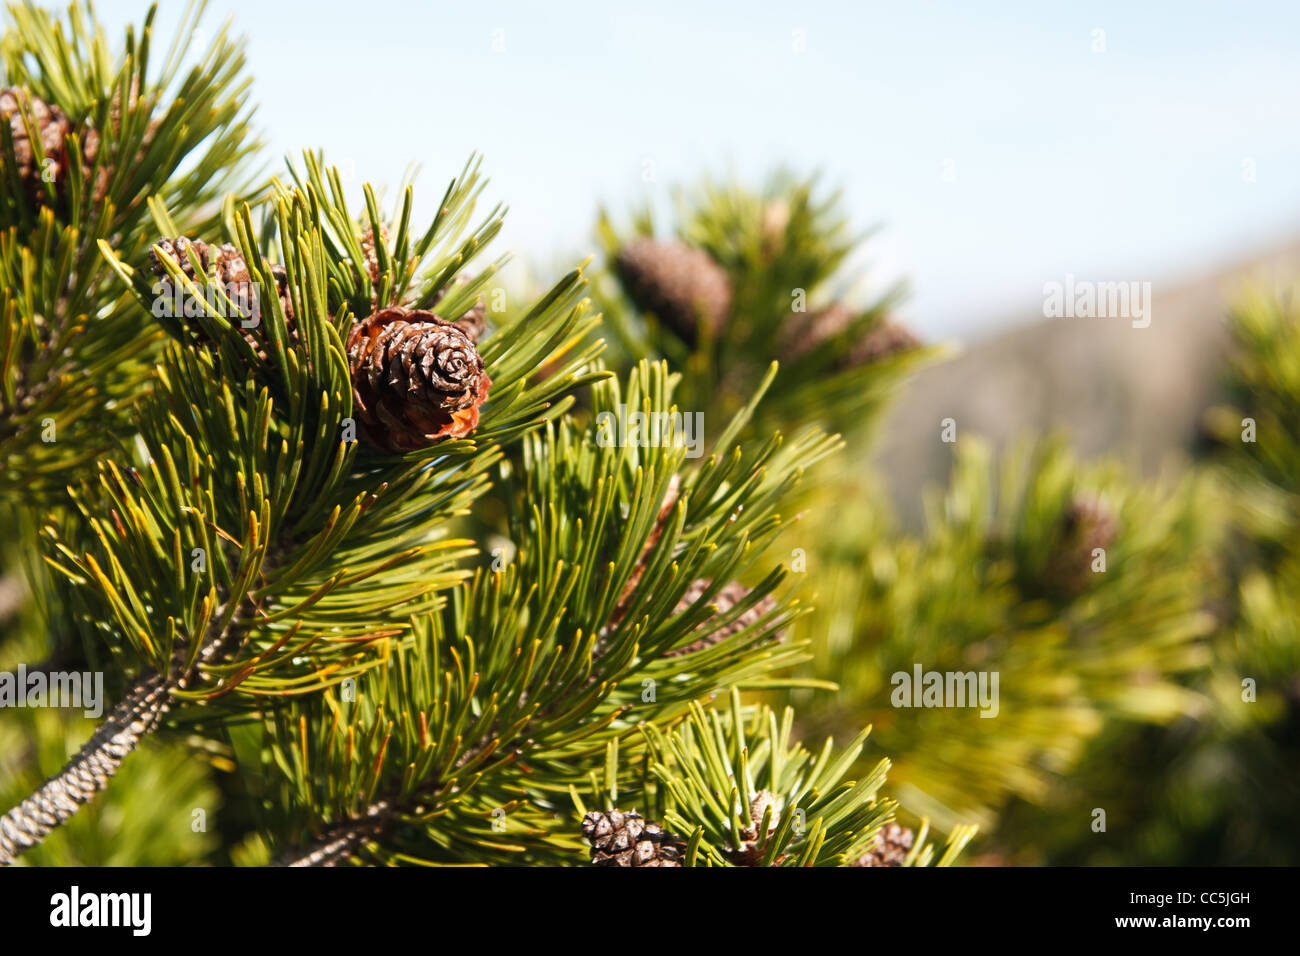 Close up of dwarf mountain pine (Pinus mugo) branches with cones. Stock Photo